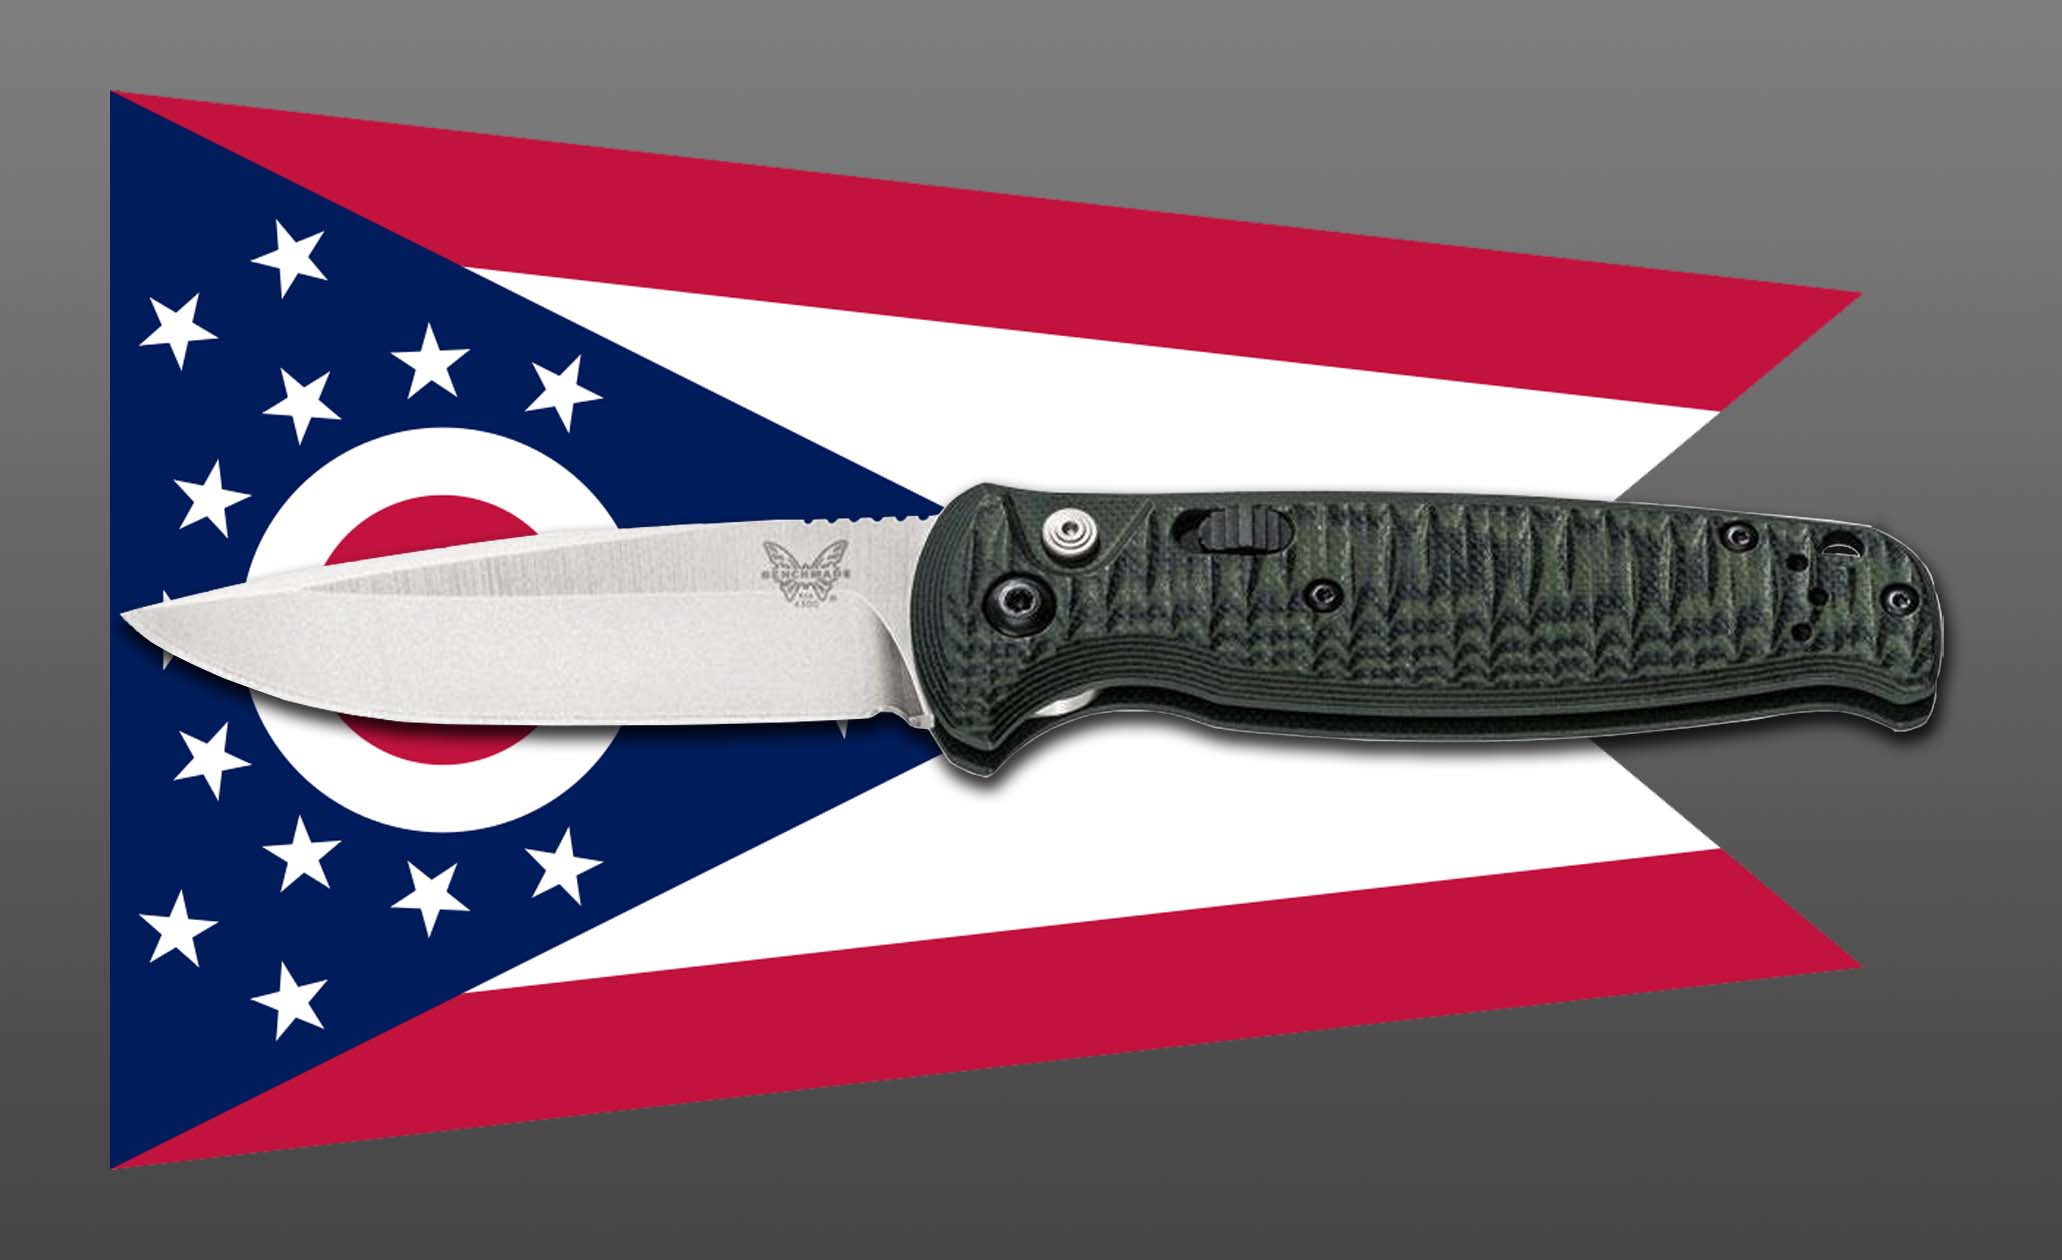 Knife Rights Seeks to Pass Knife Law Preemption in OH